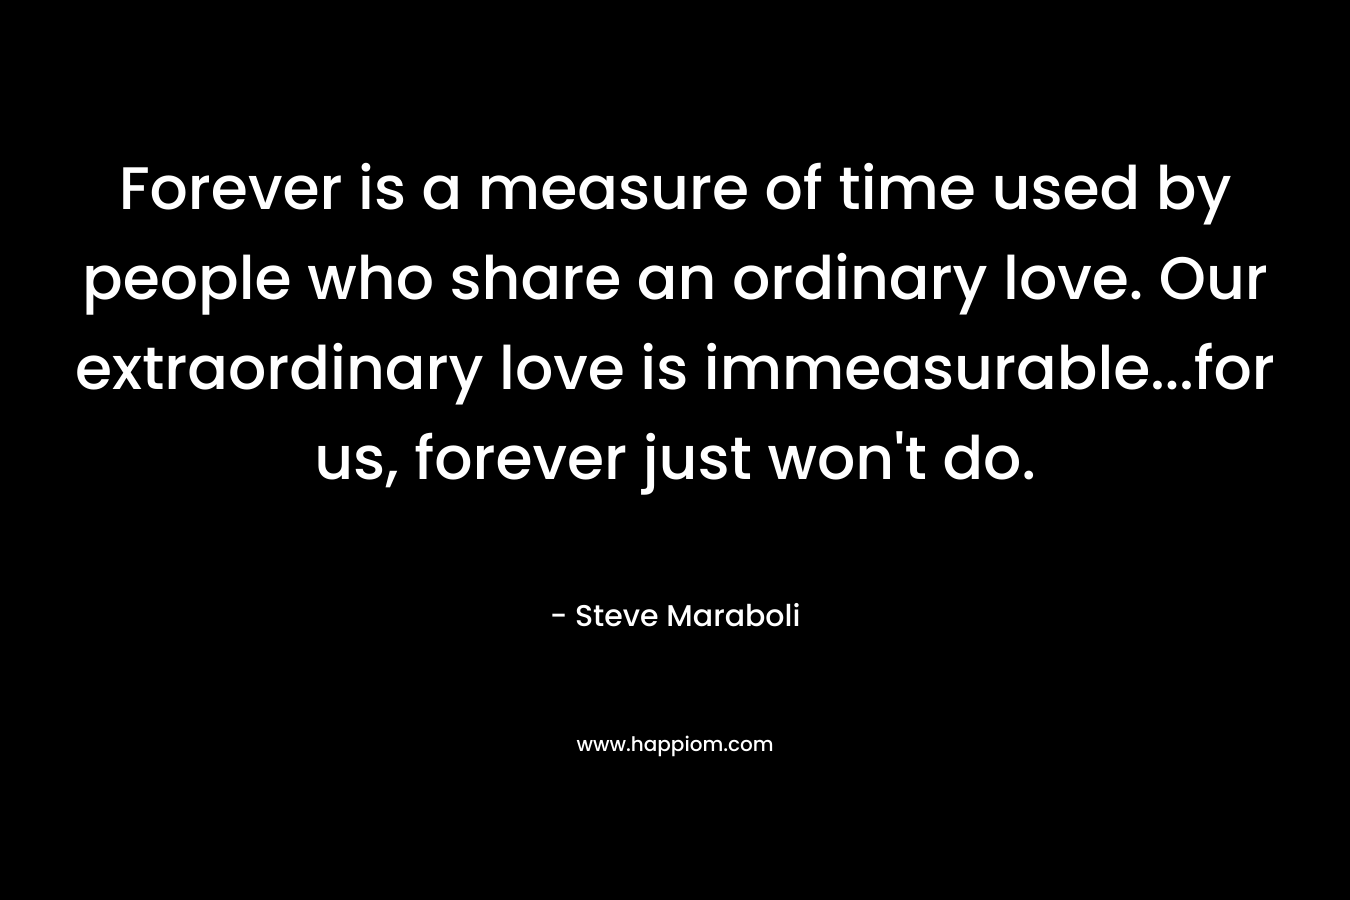 Forever is a measure of time used by people who share an ordinary love. Our extraordinary love is immeasurable...for us, forever just won't do.